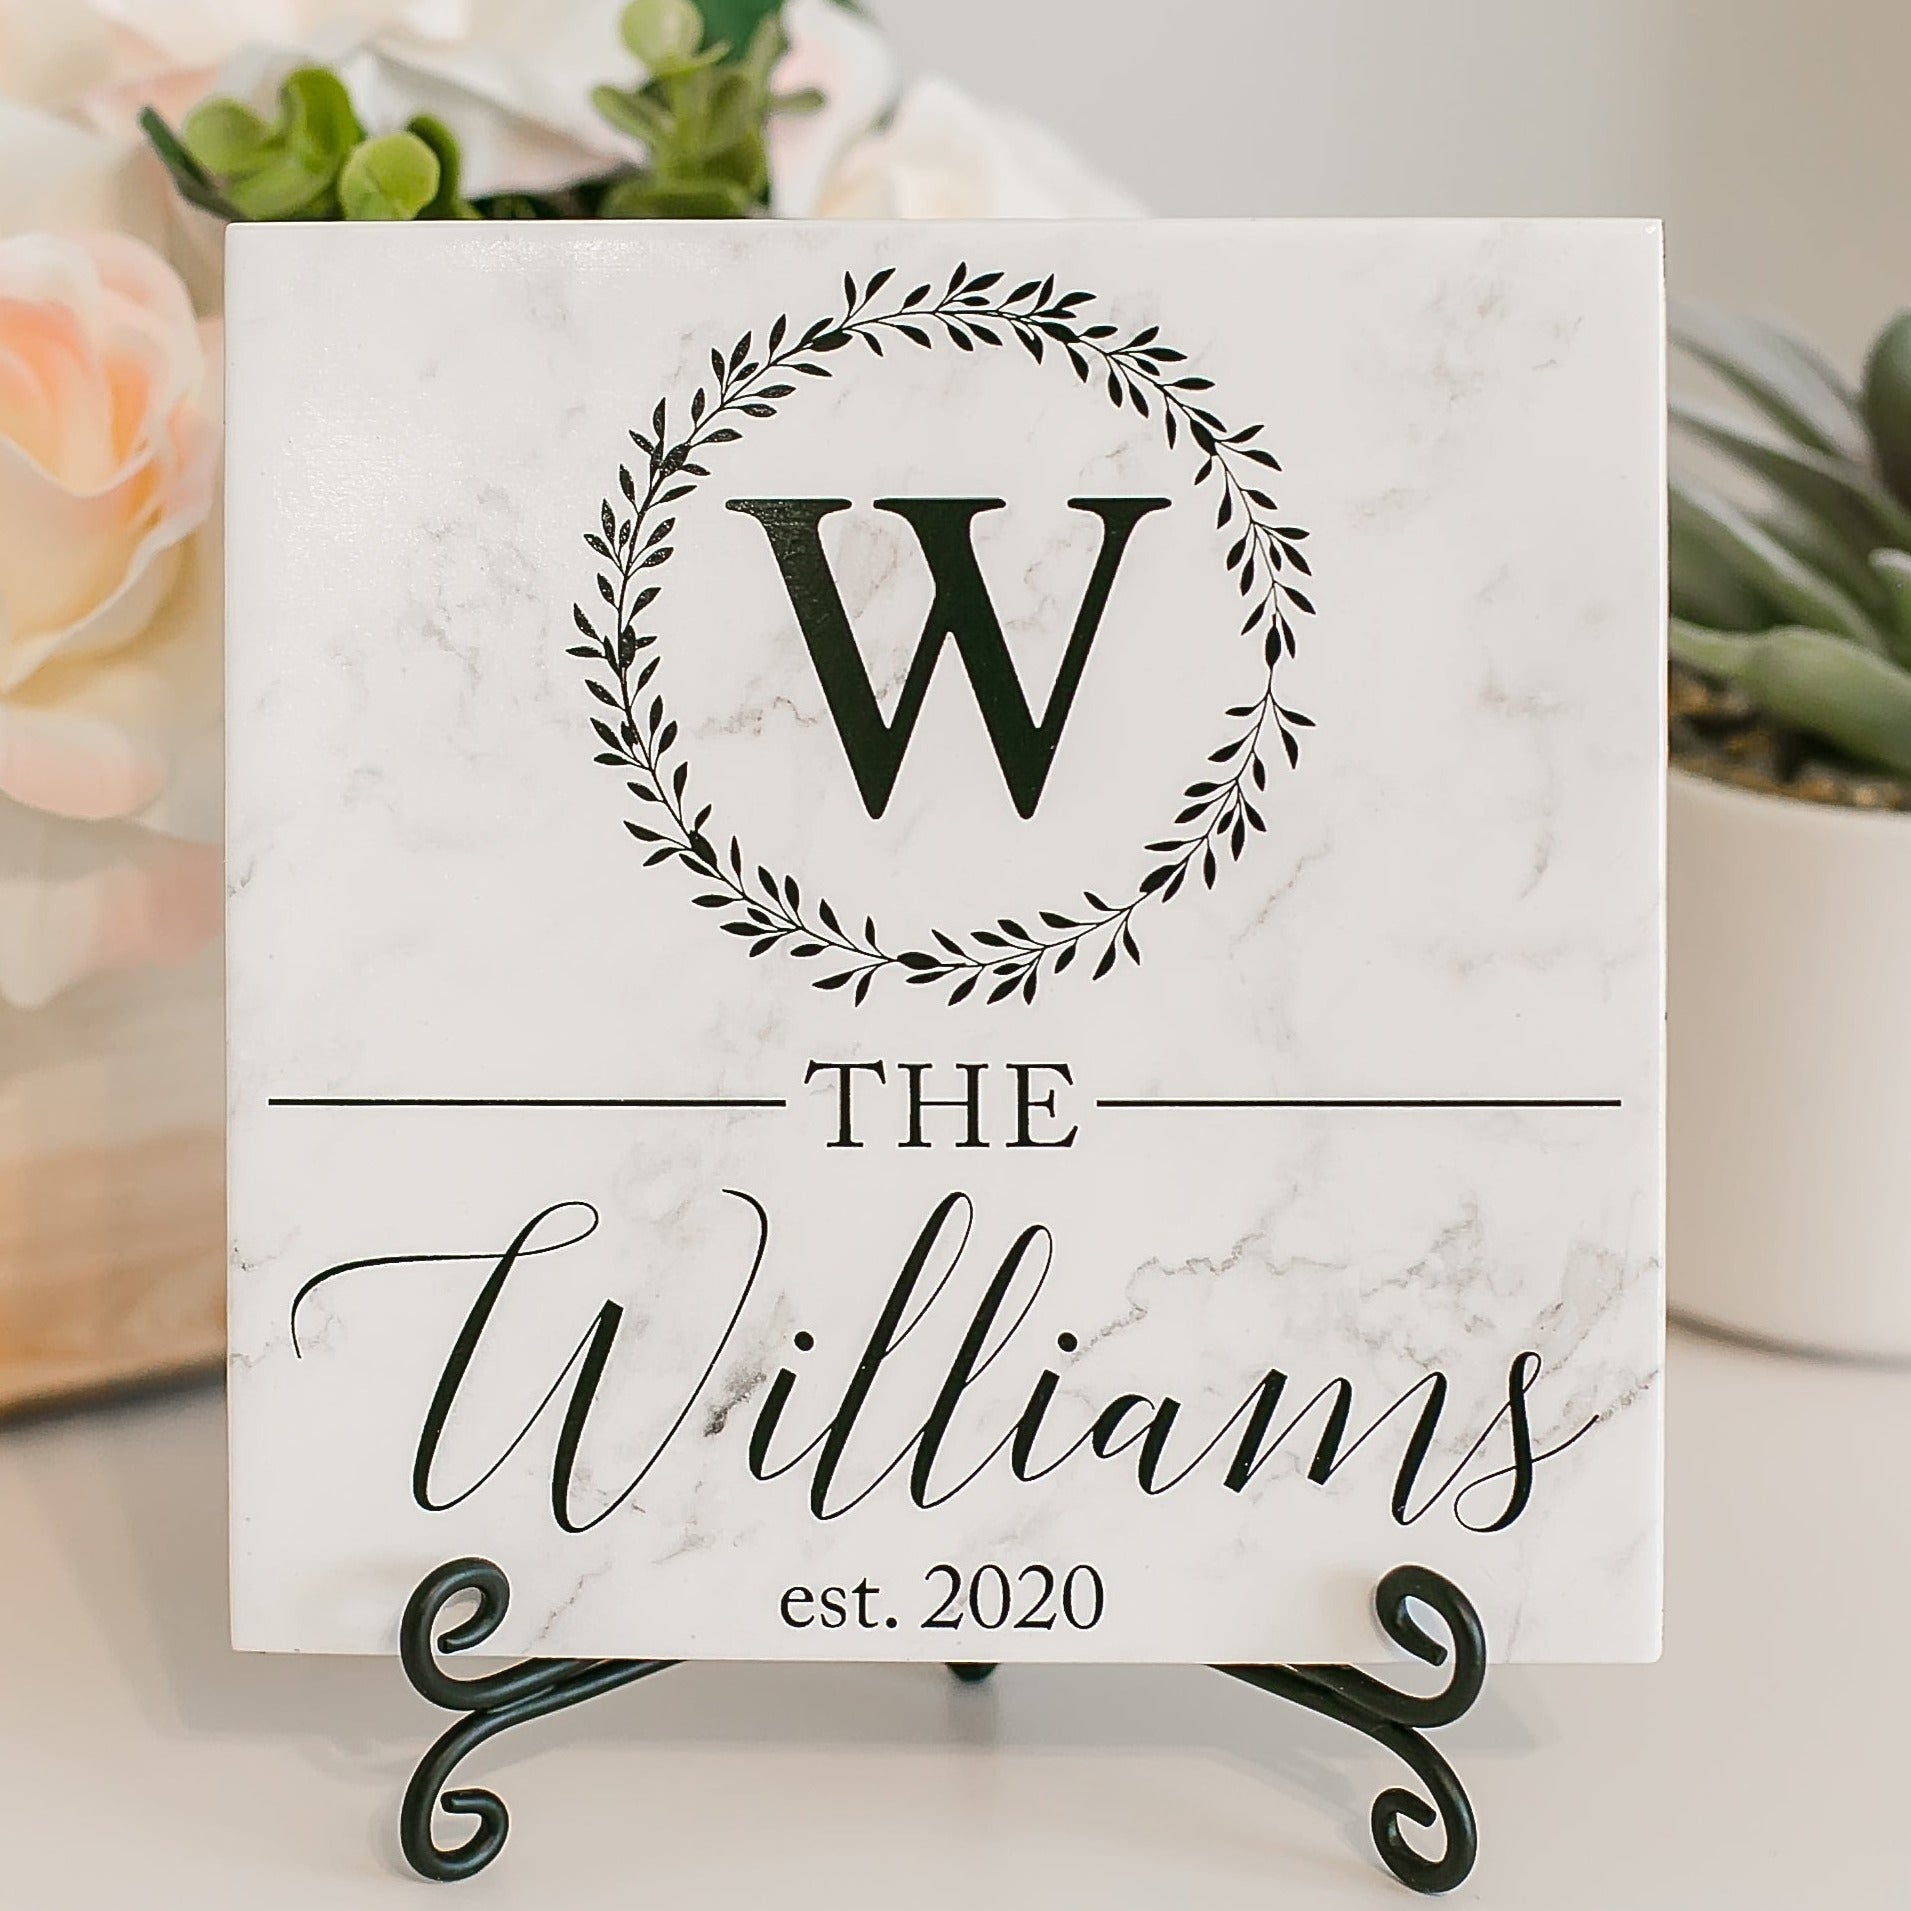 Personalized Wreath Last Name Established Sign